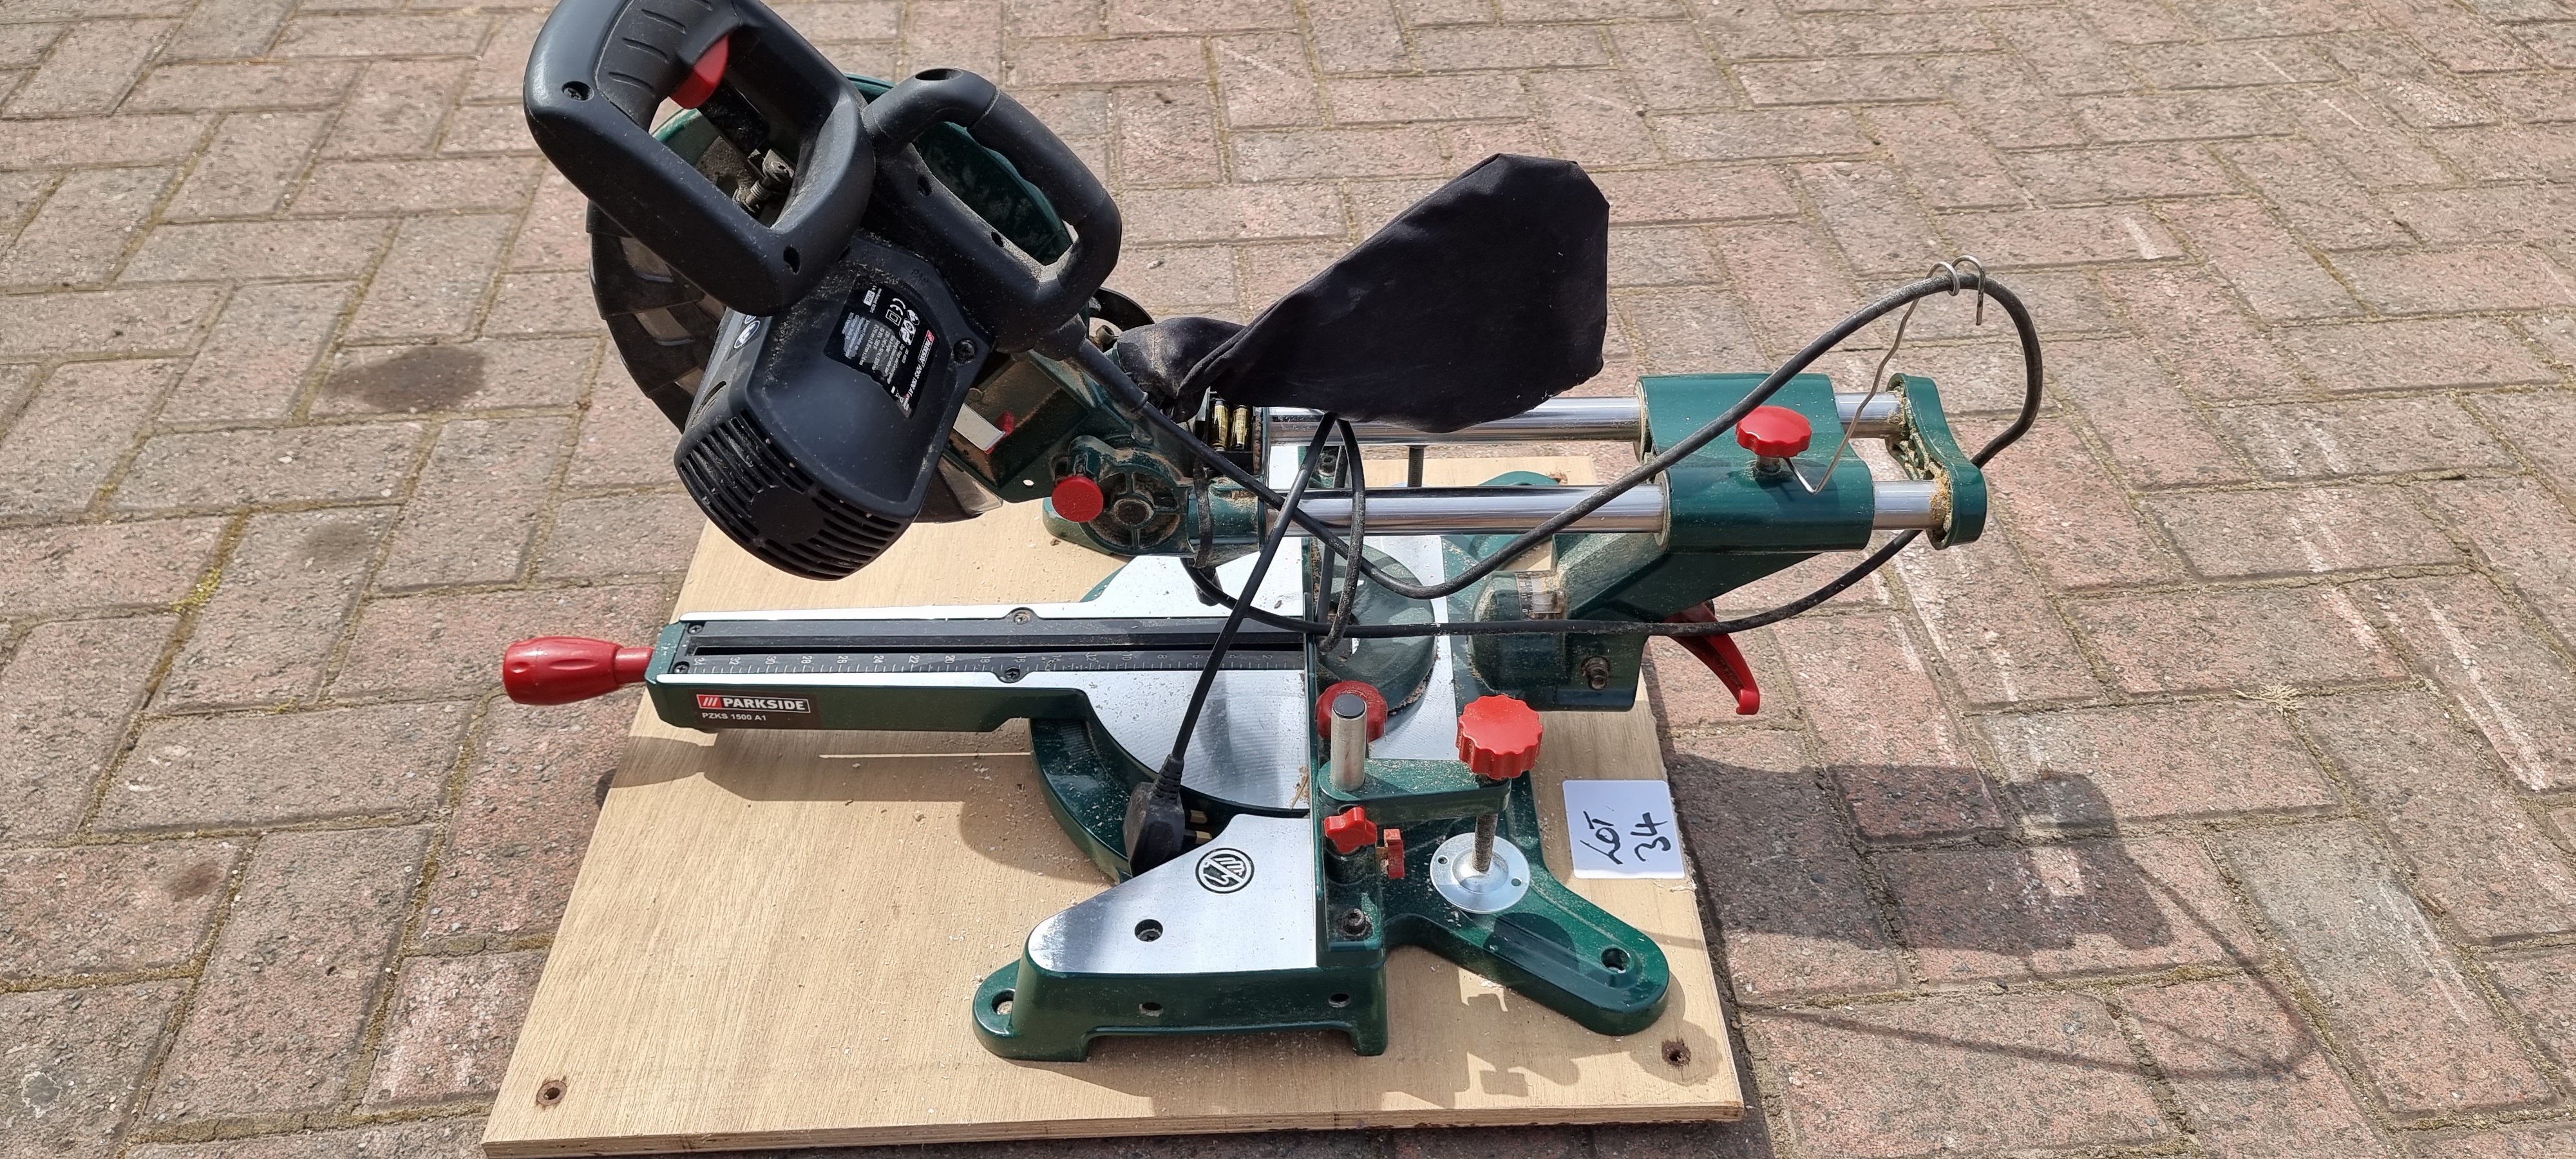 A Parkside PZKS 1500 A1 bench saw - Image 2 of 3